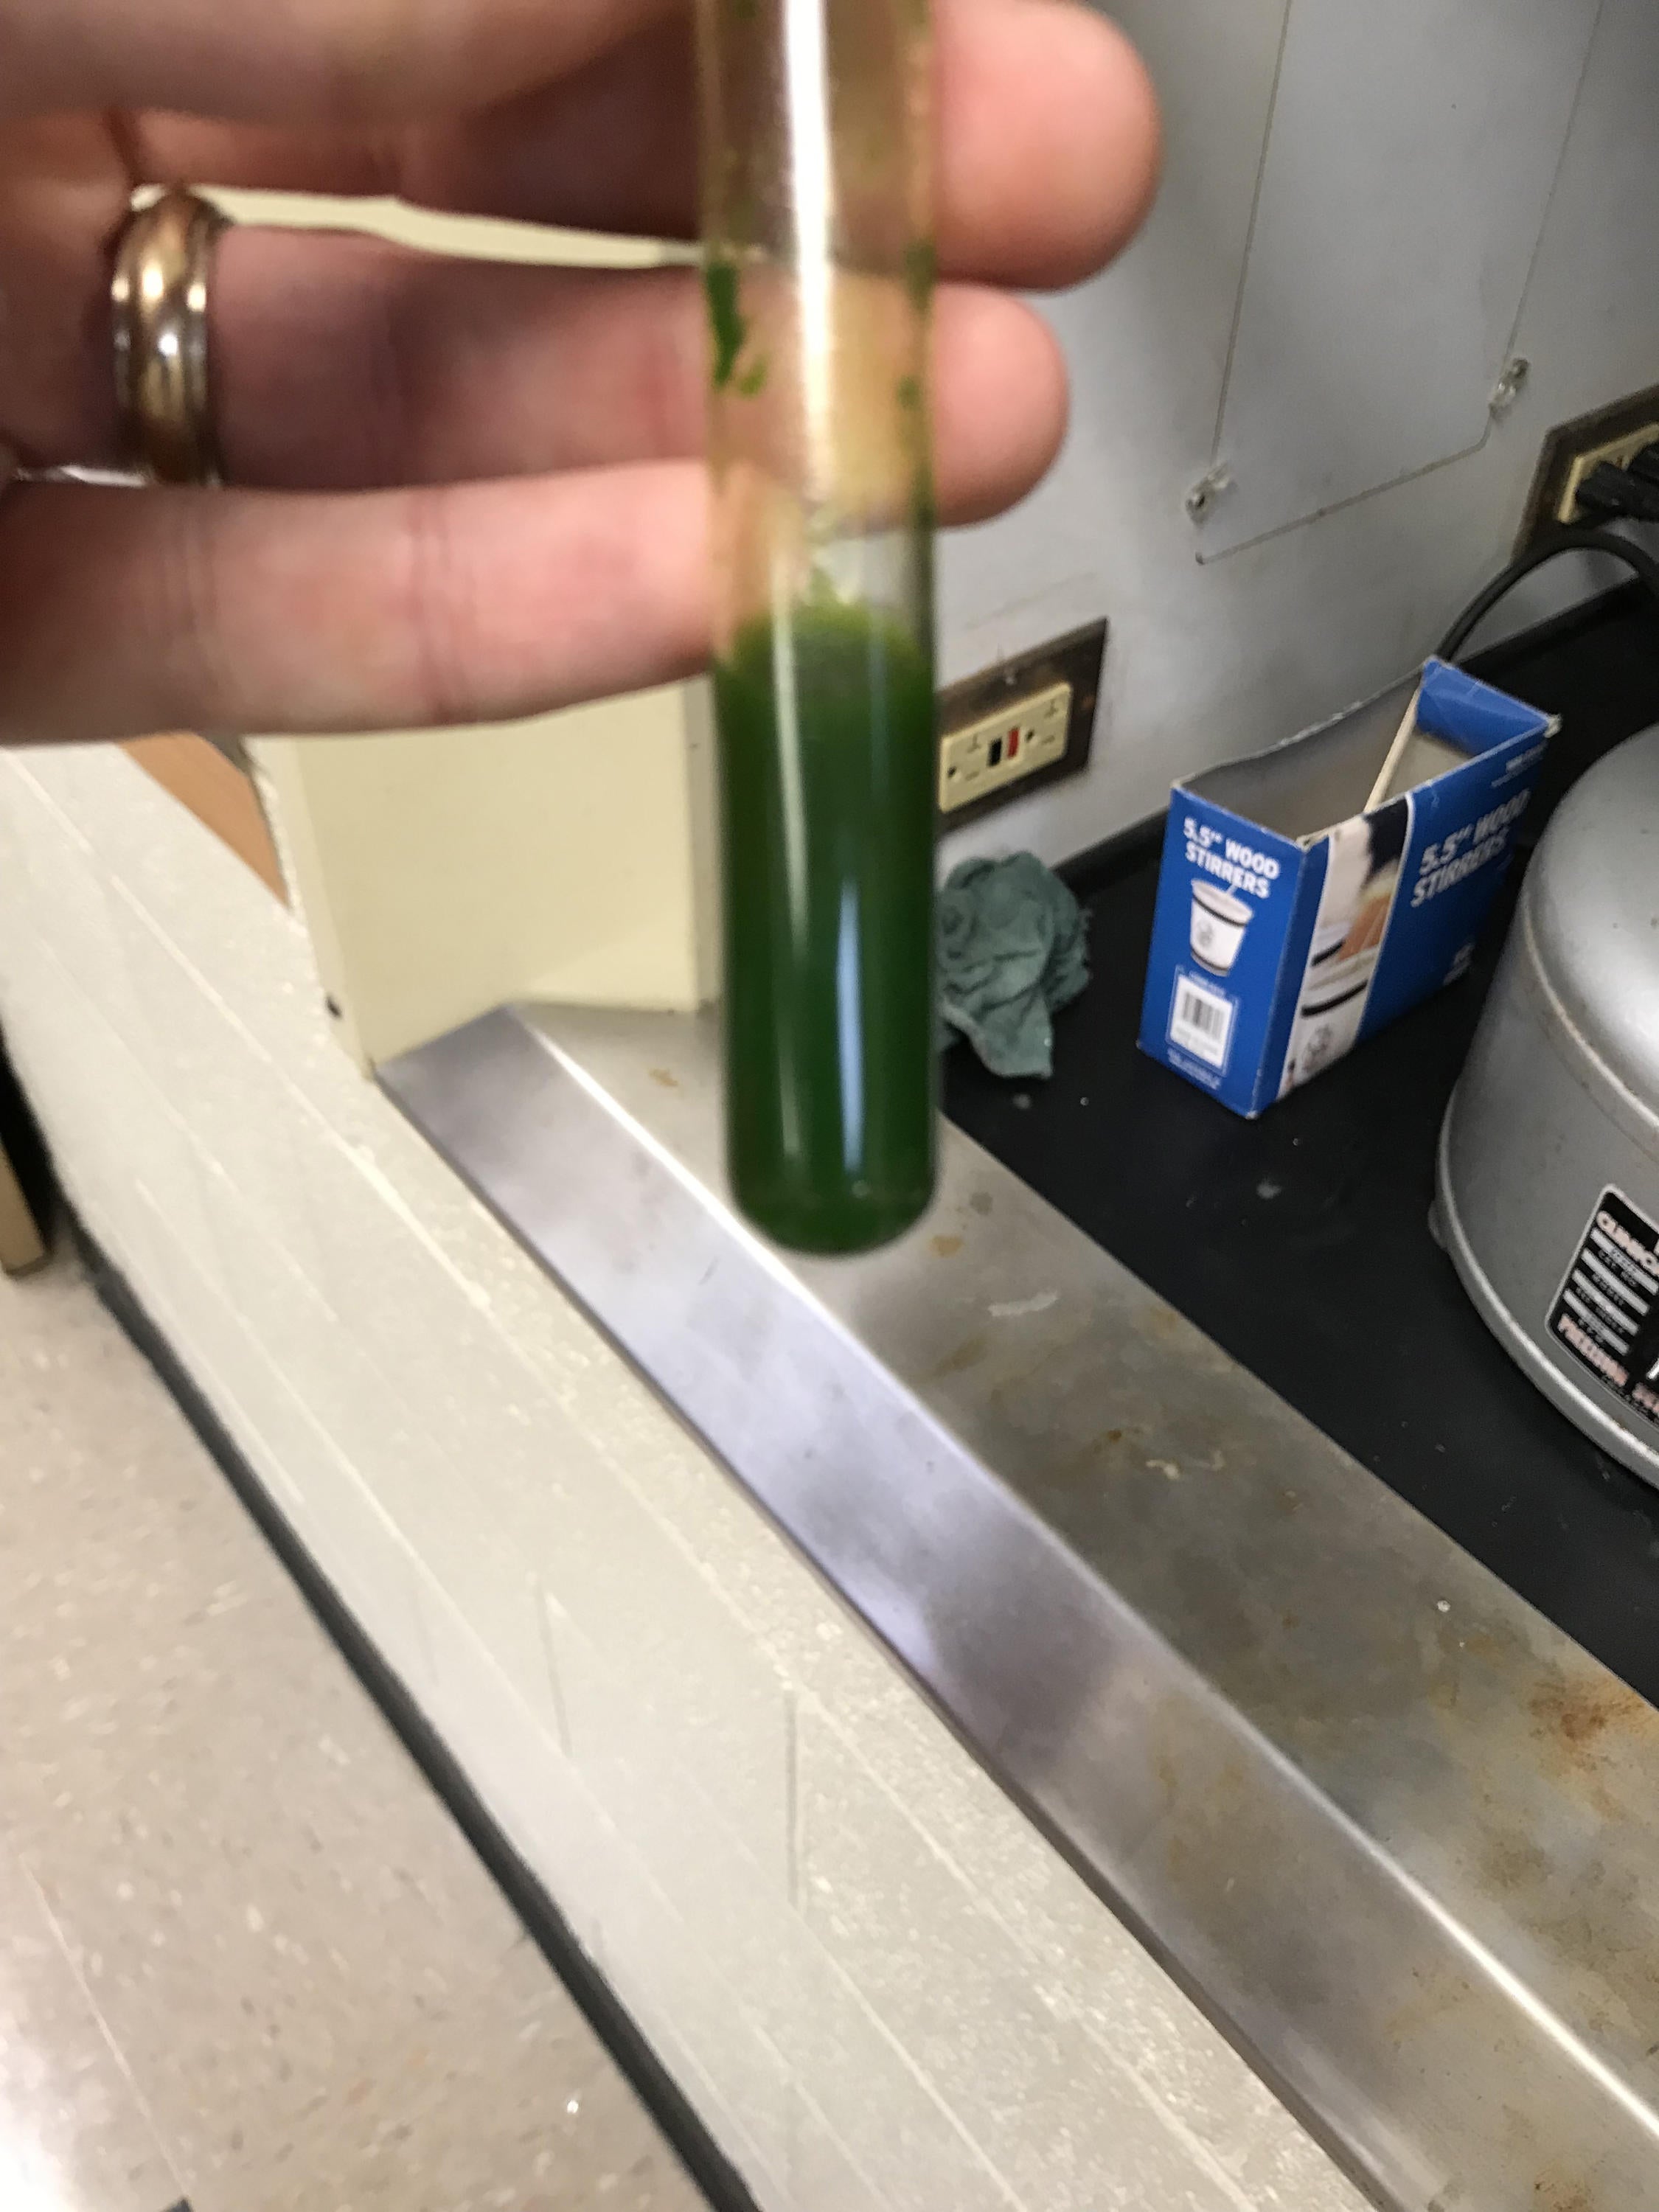 A test tube with a dark green solution